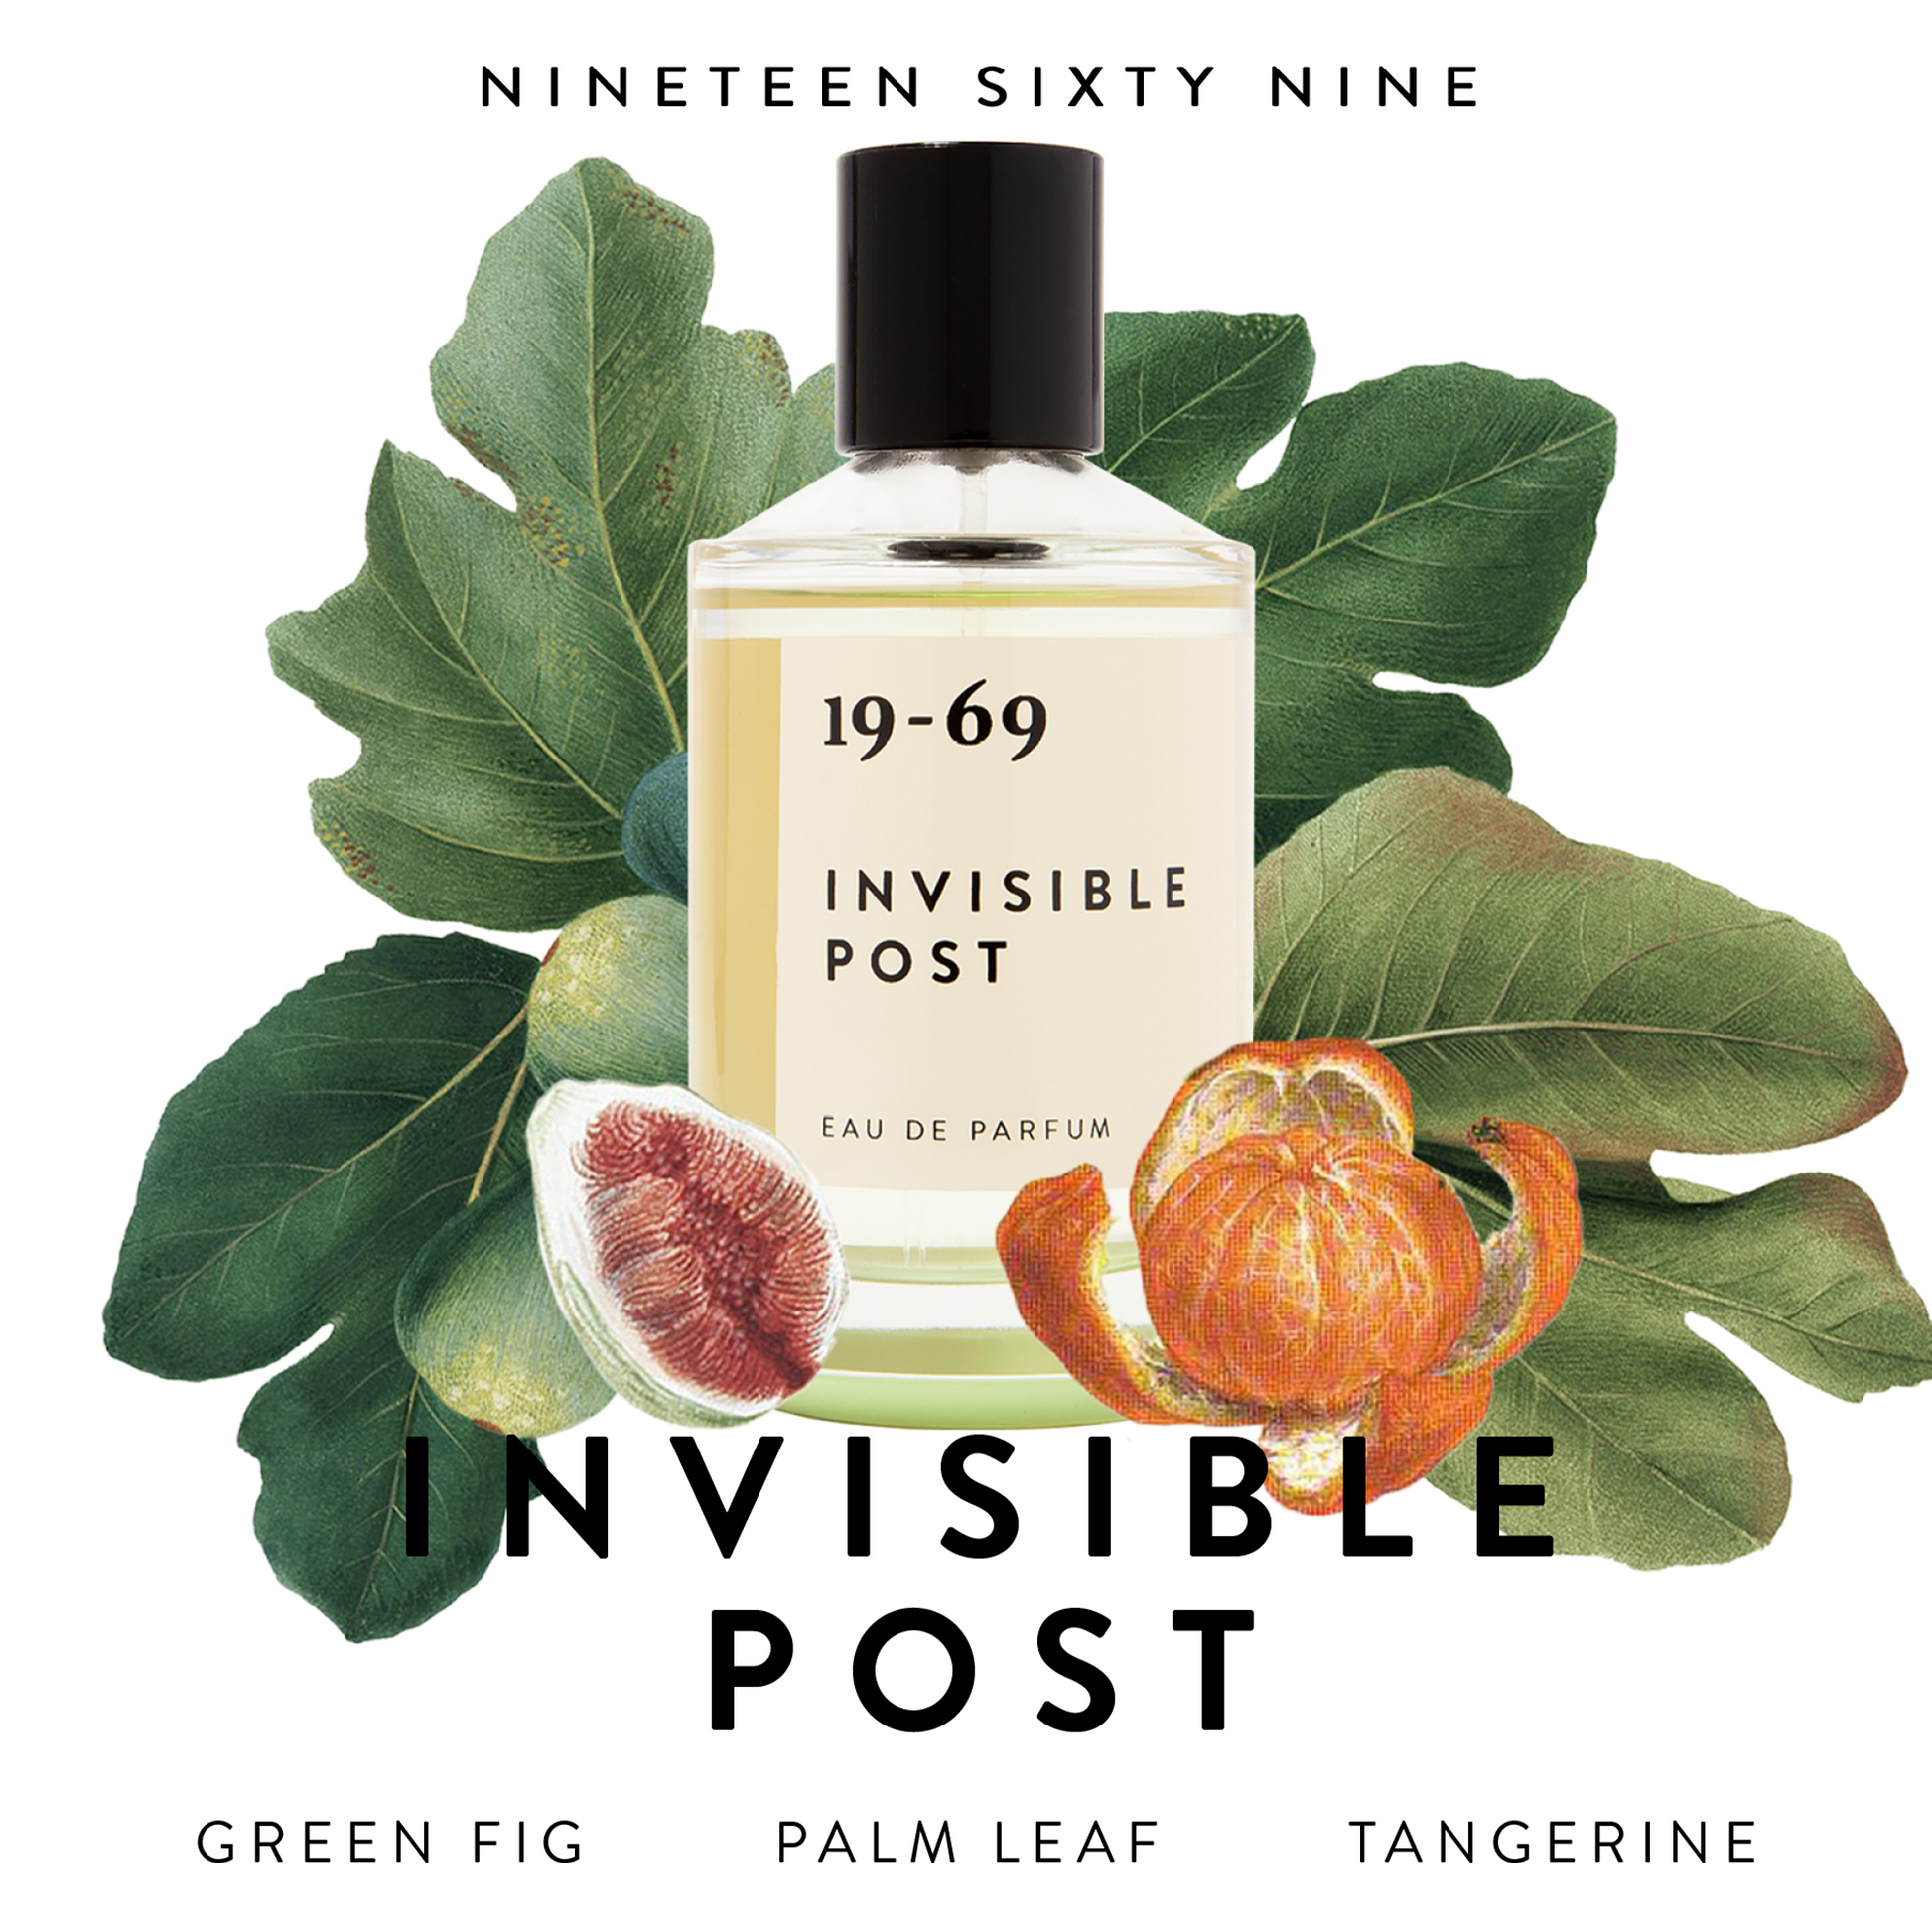 19-69 Invisible Post Perfume: Inspired by the Summer of Love and the hippie trails of the 1960s. Ideas on the next hotspot or music festival were shared within the hippie community by the Invisible Post.  The scent is bursting and woody. Fragrance notes include Green Fig, Black Currant and Virginian Cedarwood. All 19-69 fragrances are suitable for any gender.